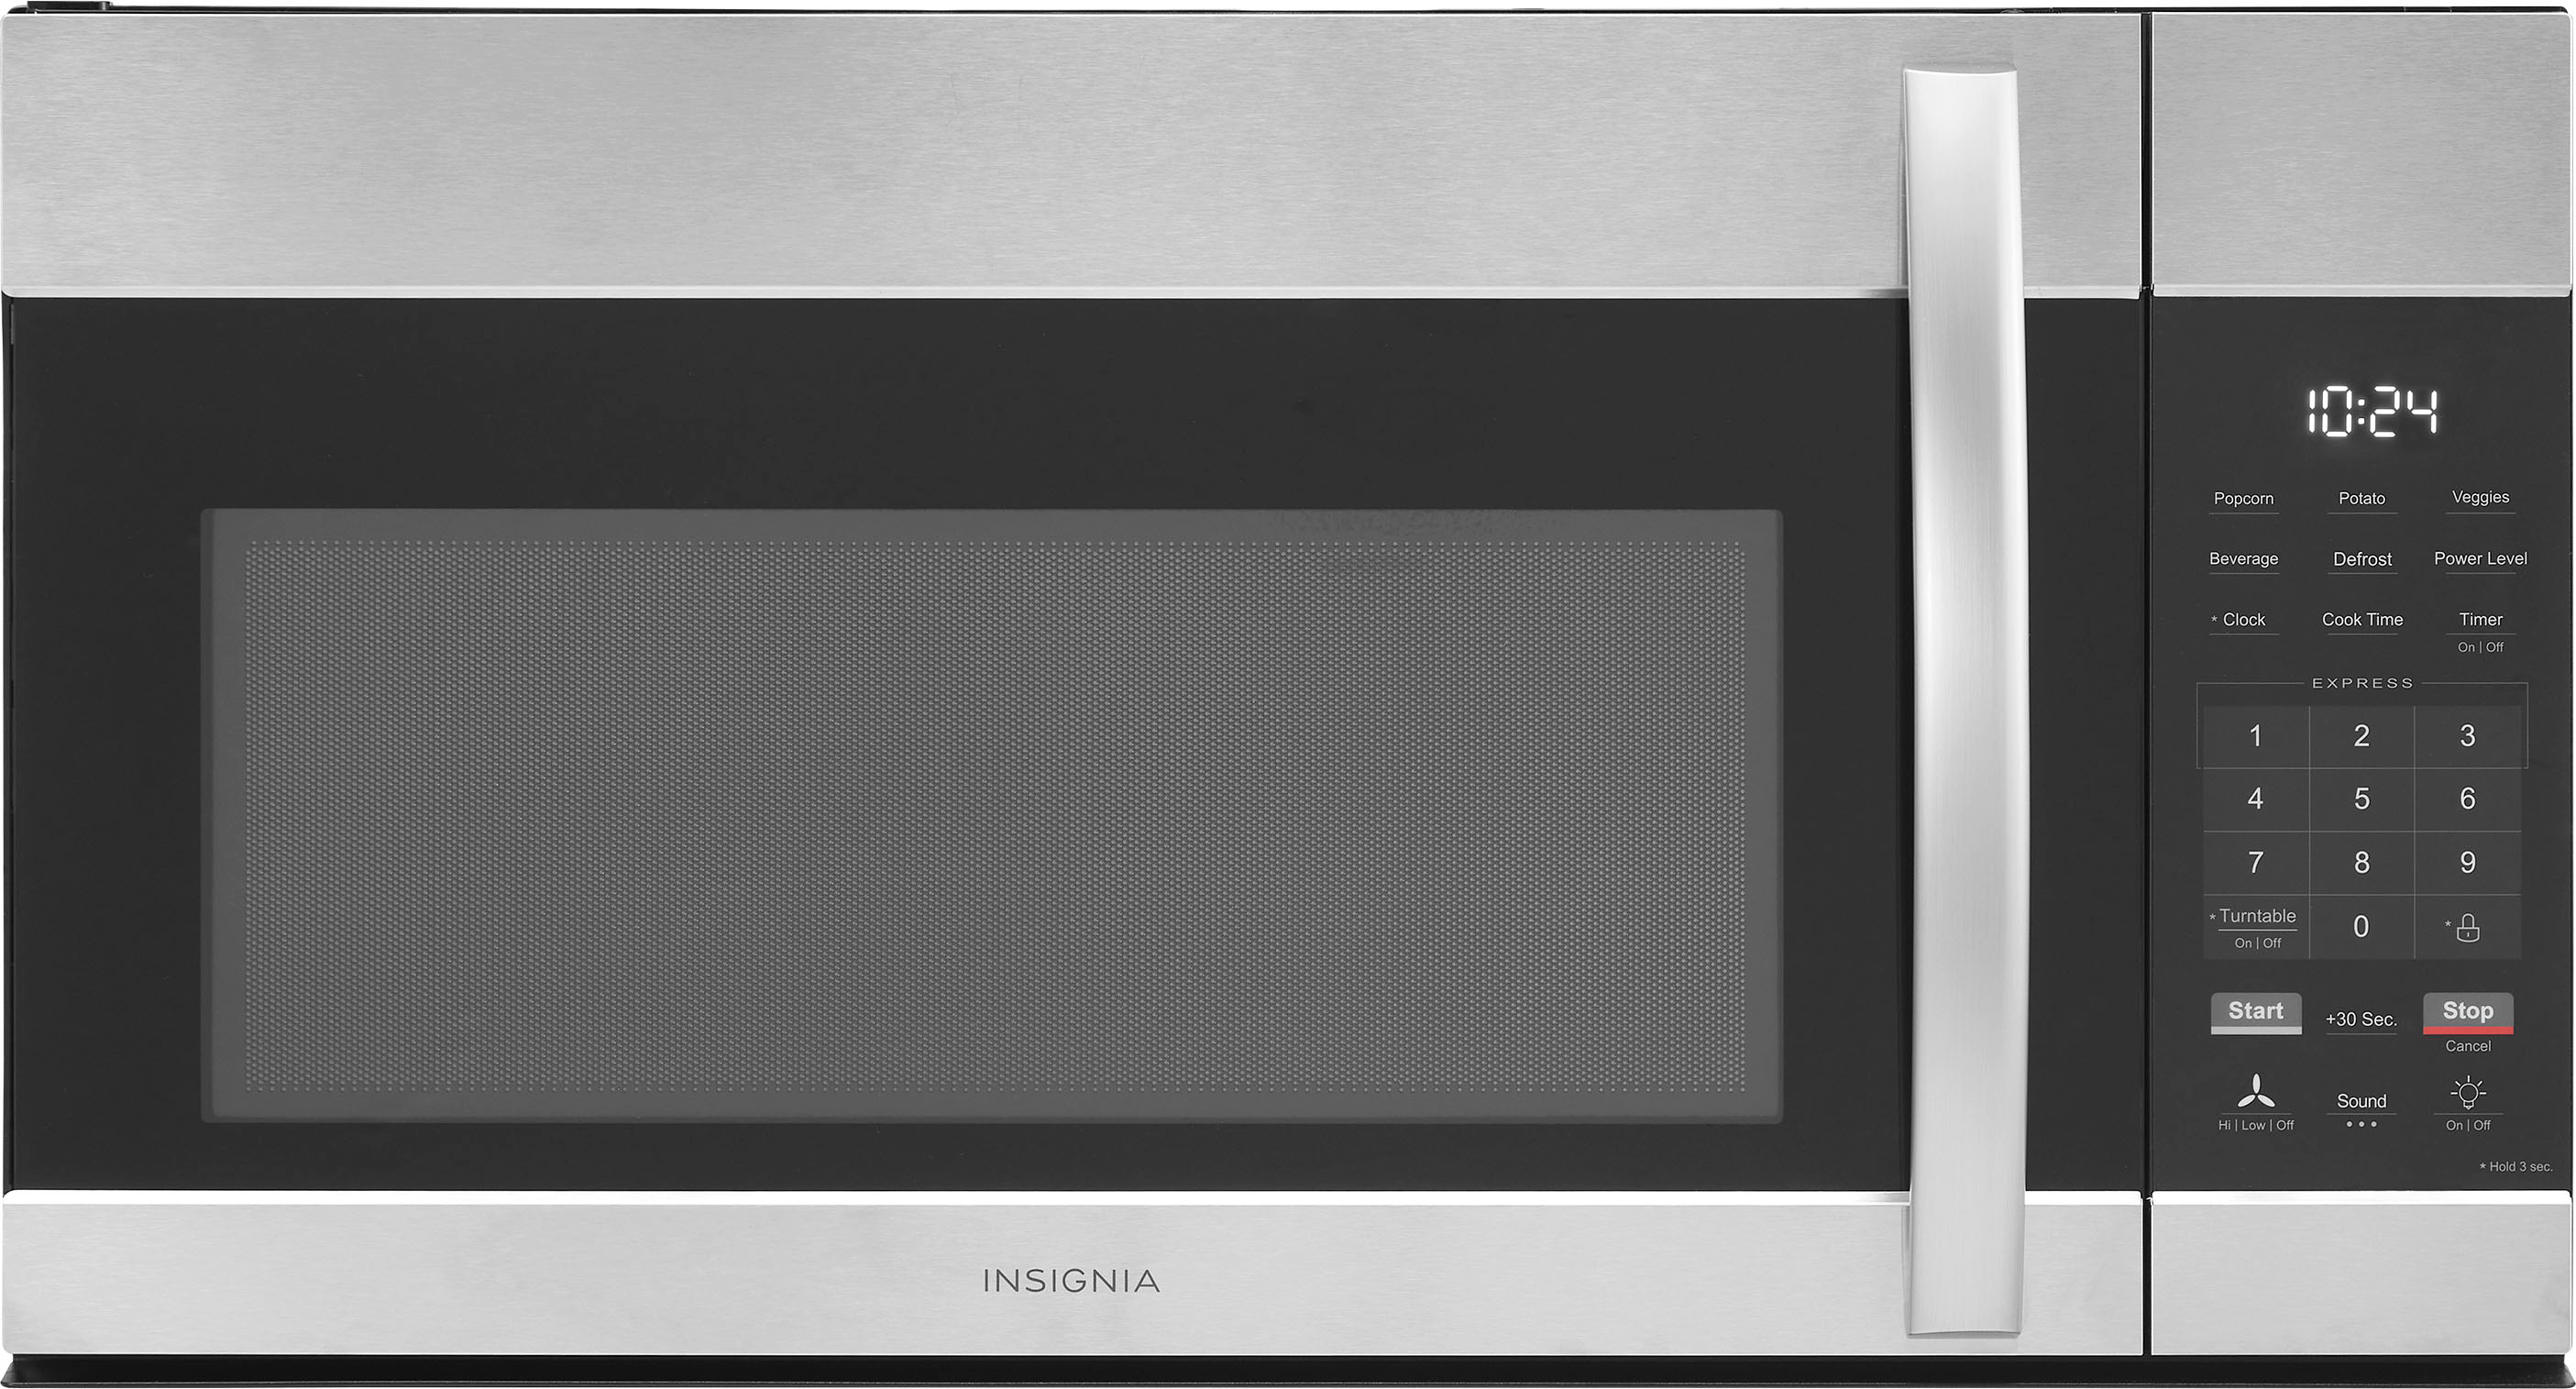 1.7 cu. ft. Over-the-Range Microwave Oven with EasyClean®